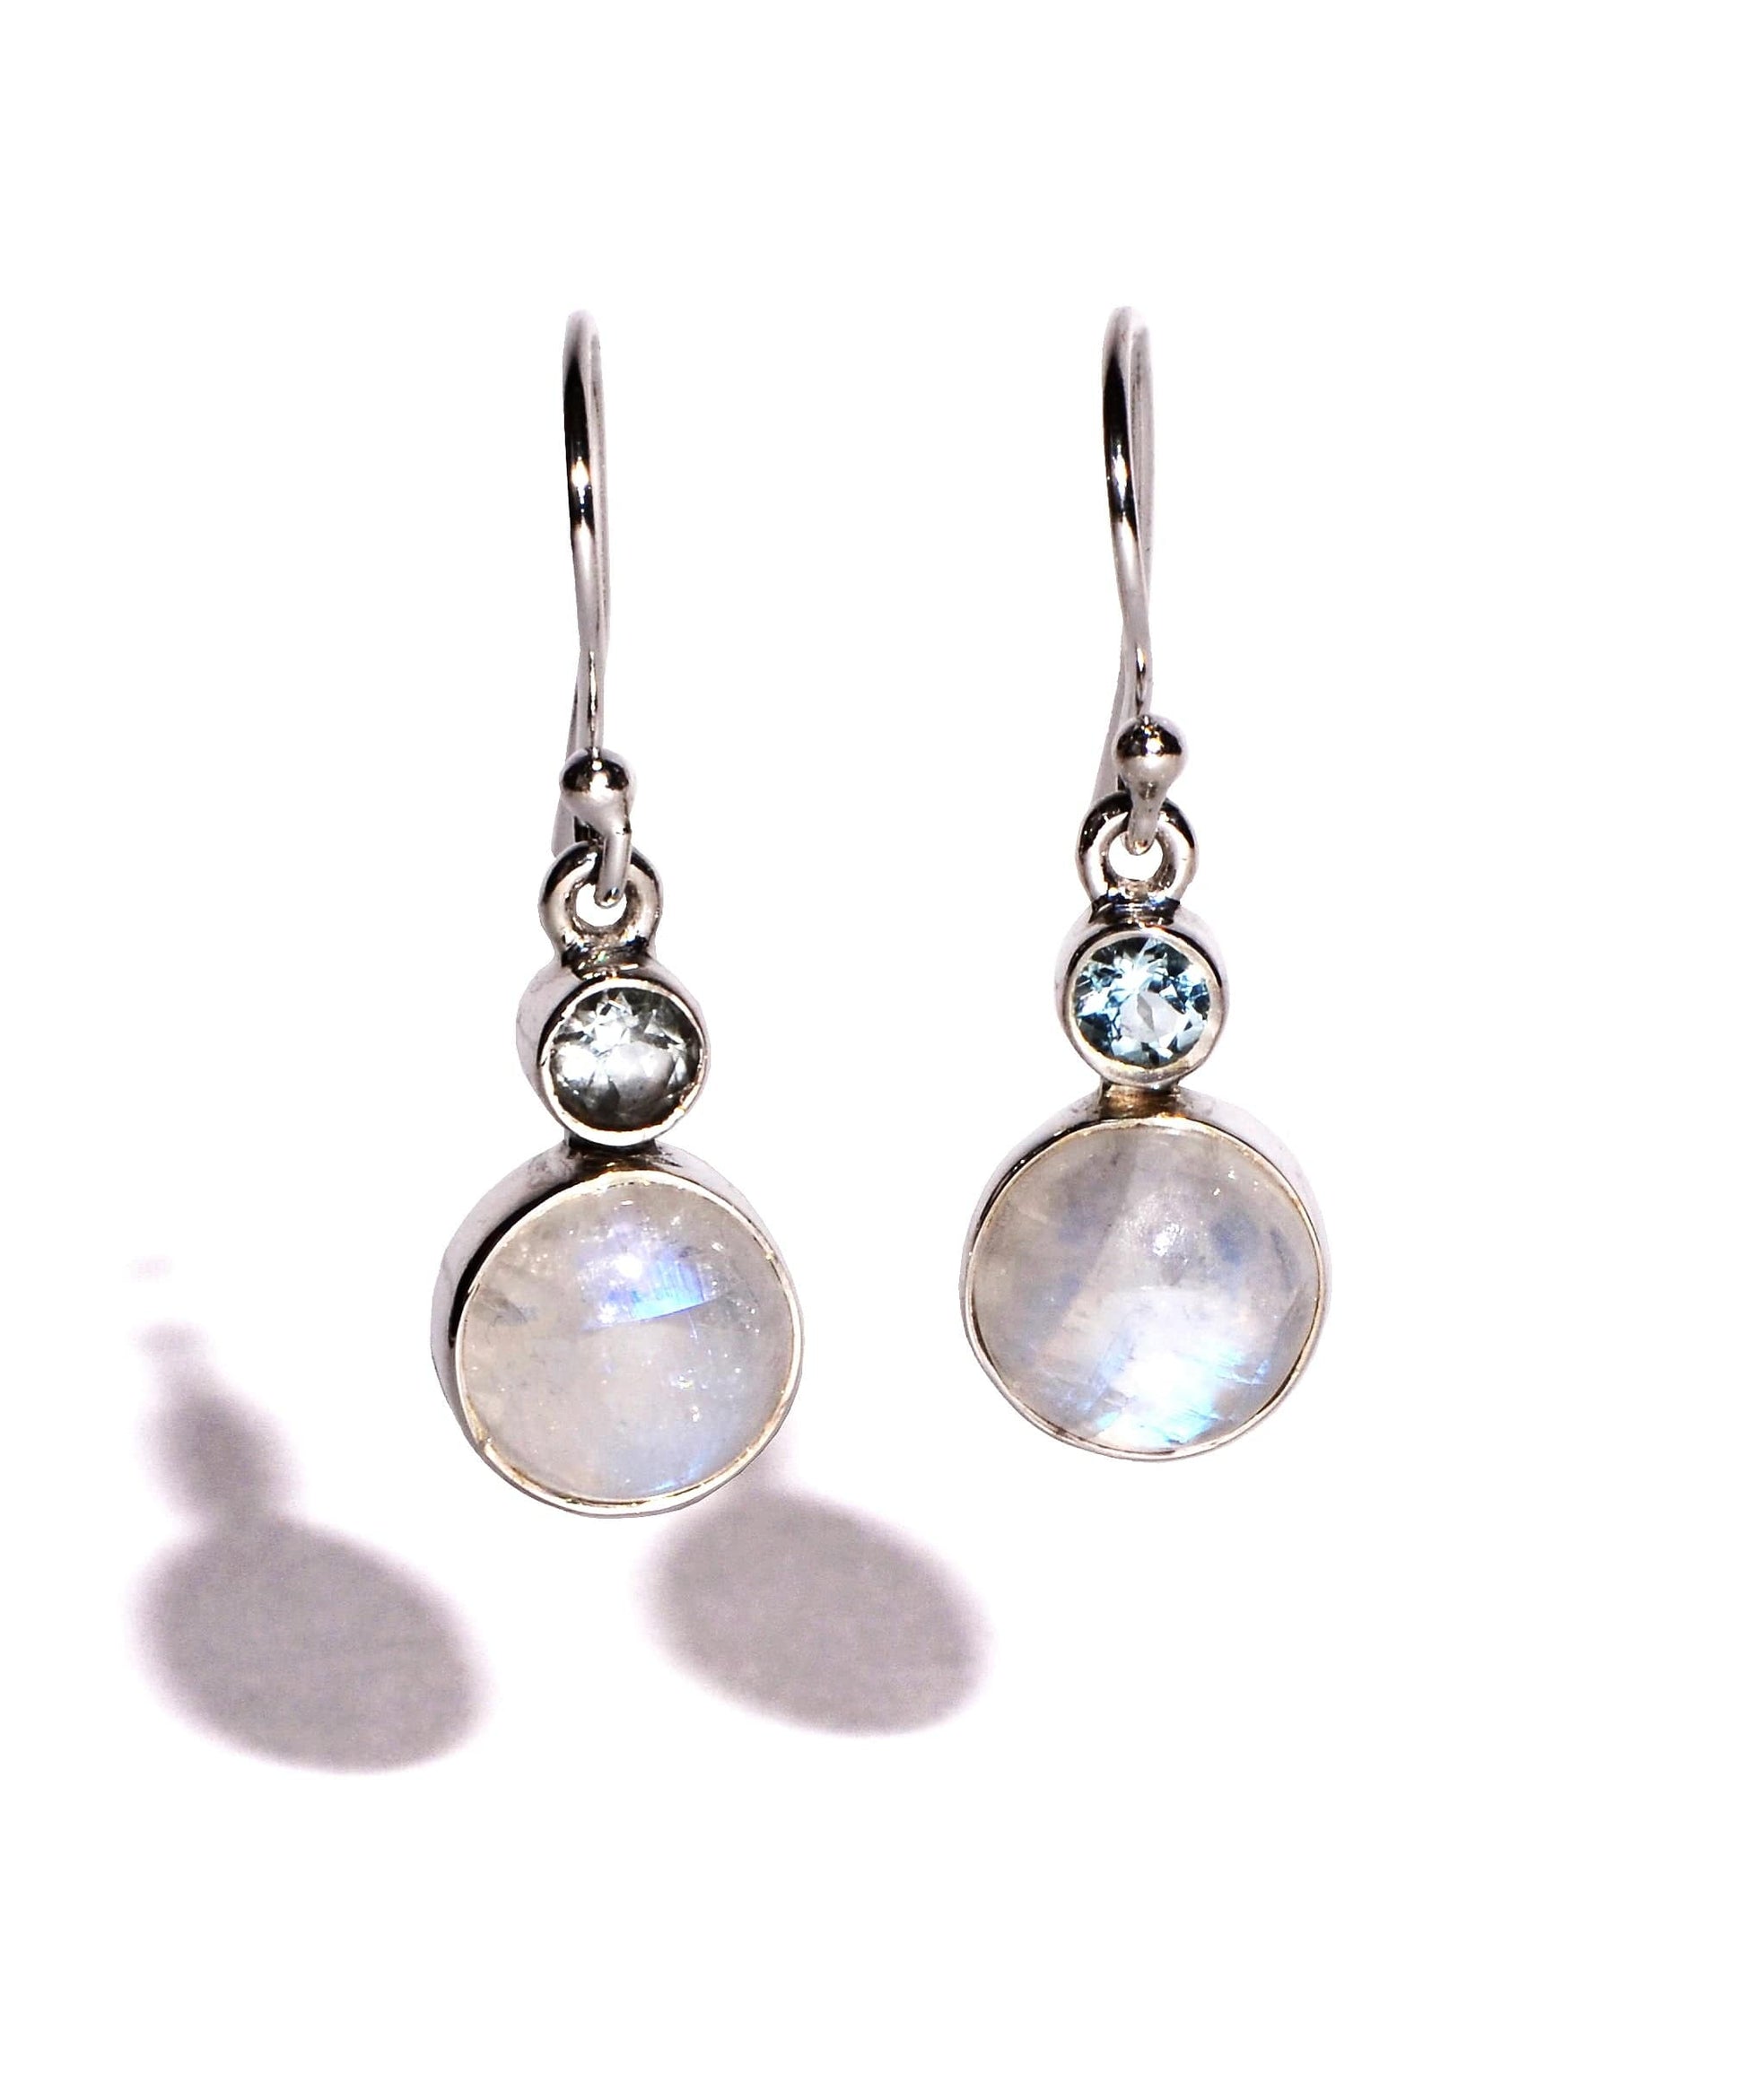 Rainbow Moonstone with Blue Faceted Topaz Sterling Silver Earrings